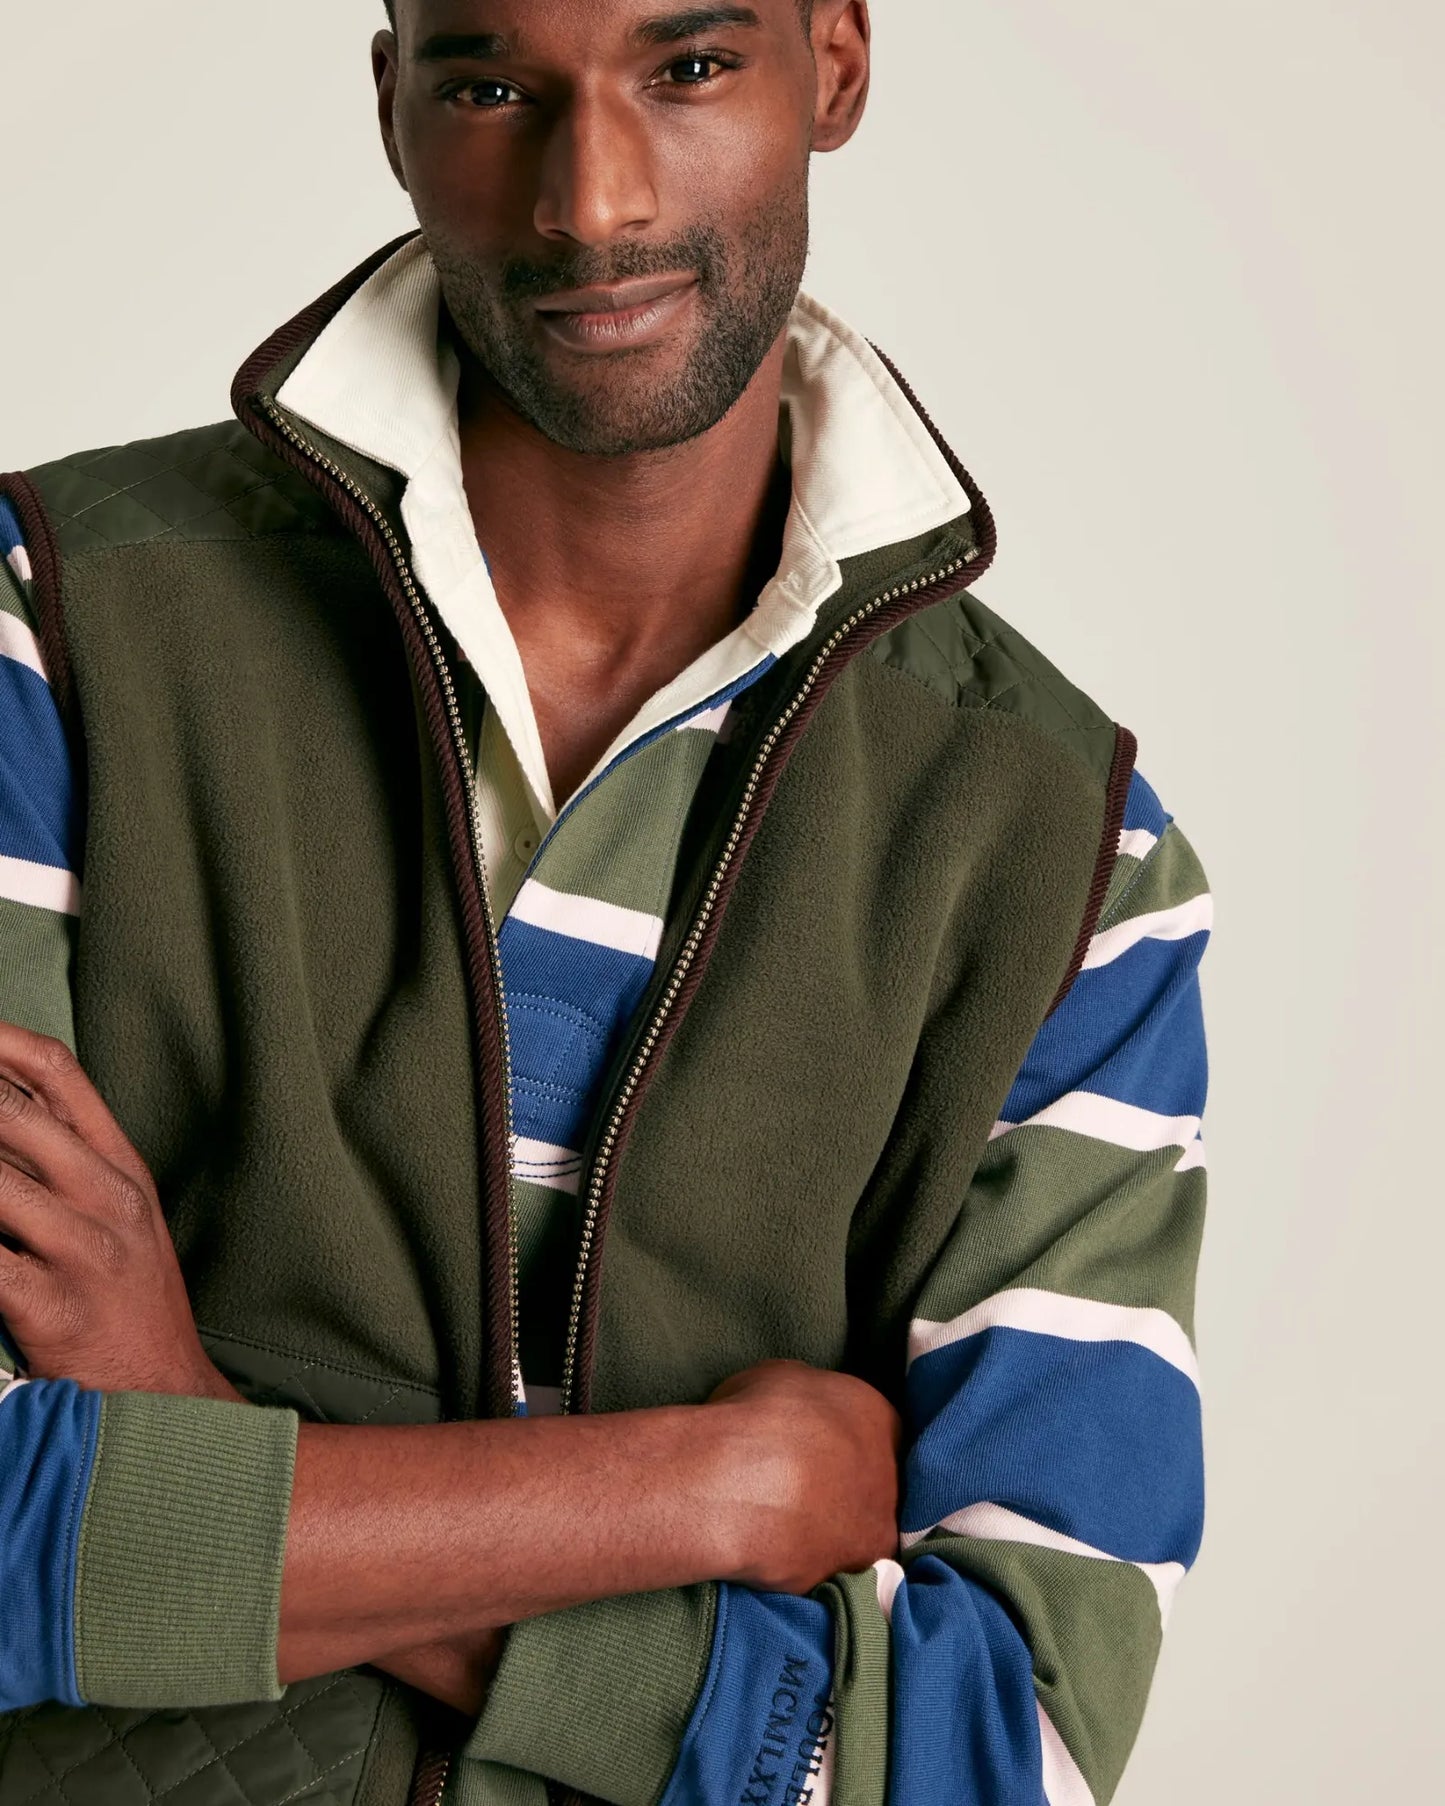 Greenfield Gilet - Heritage Green